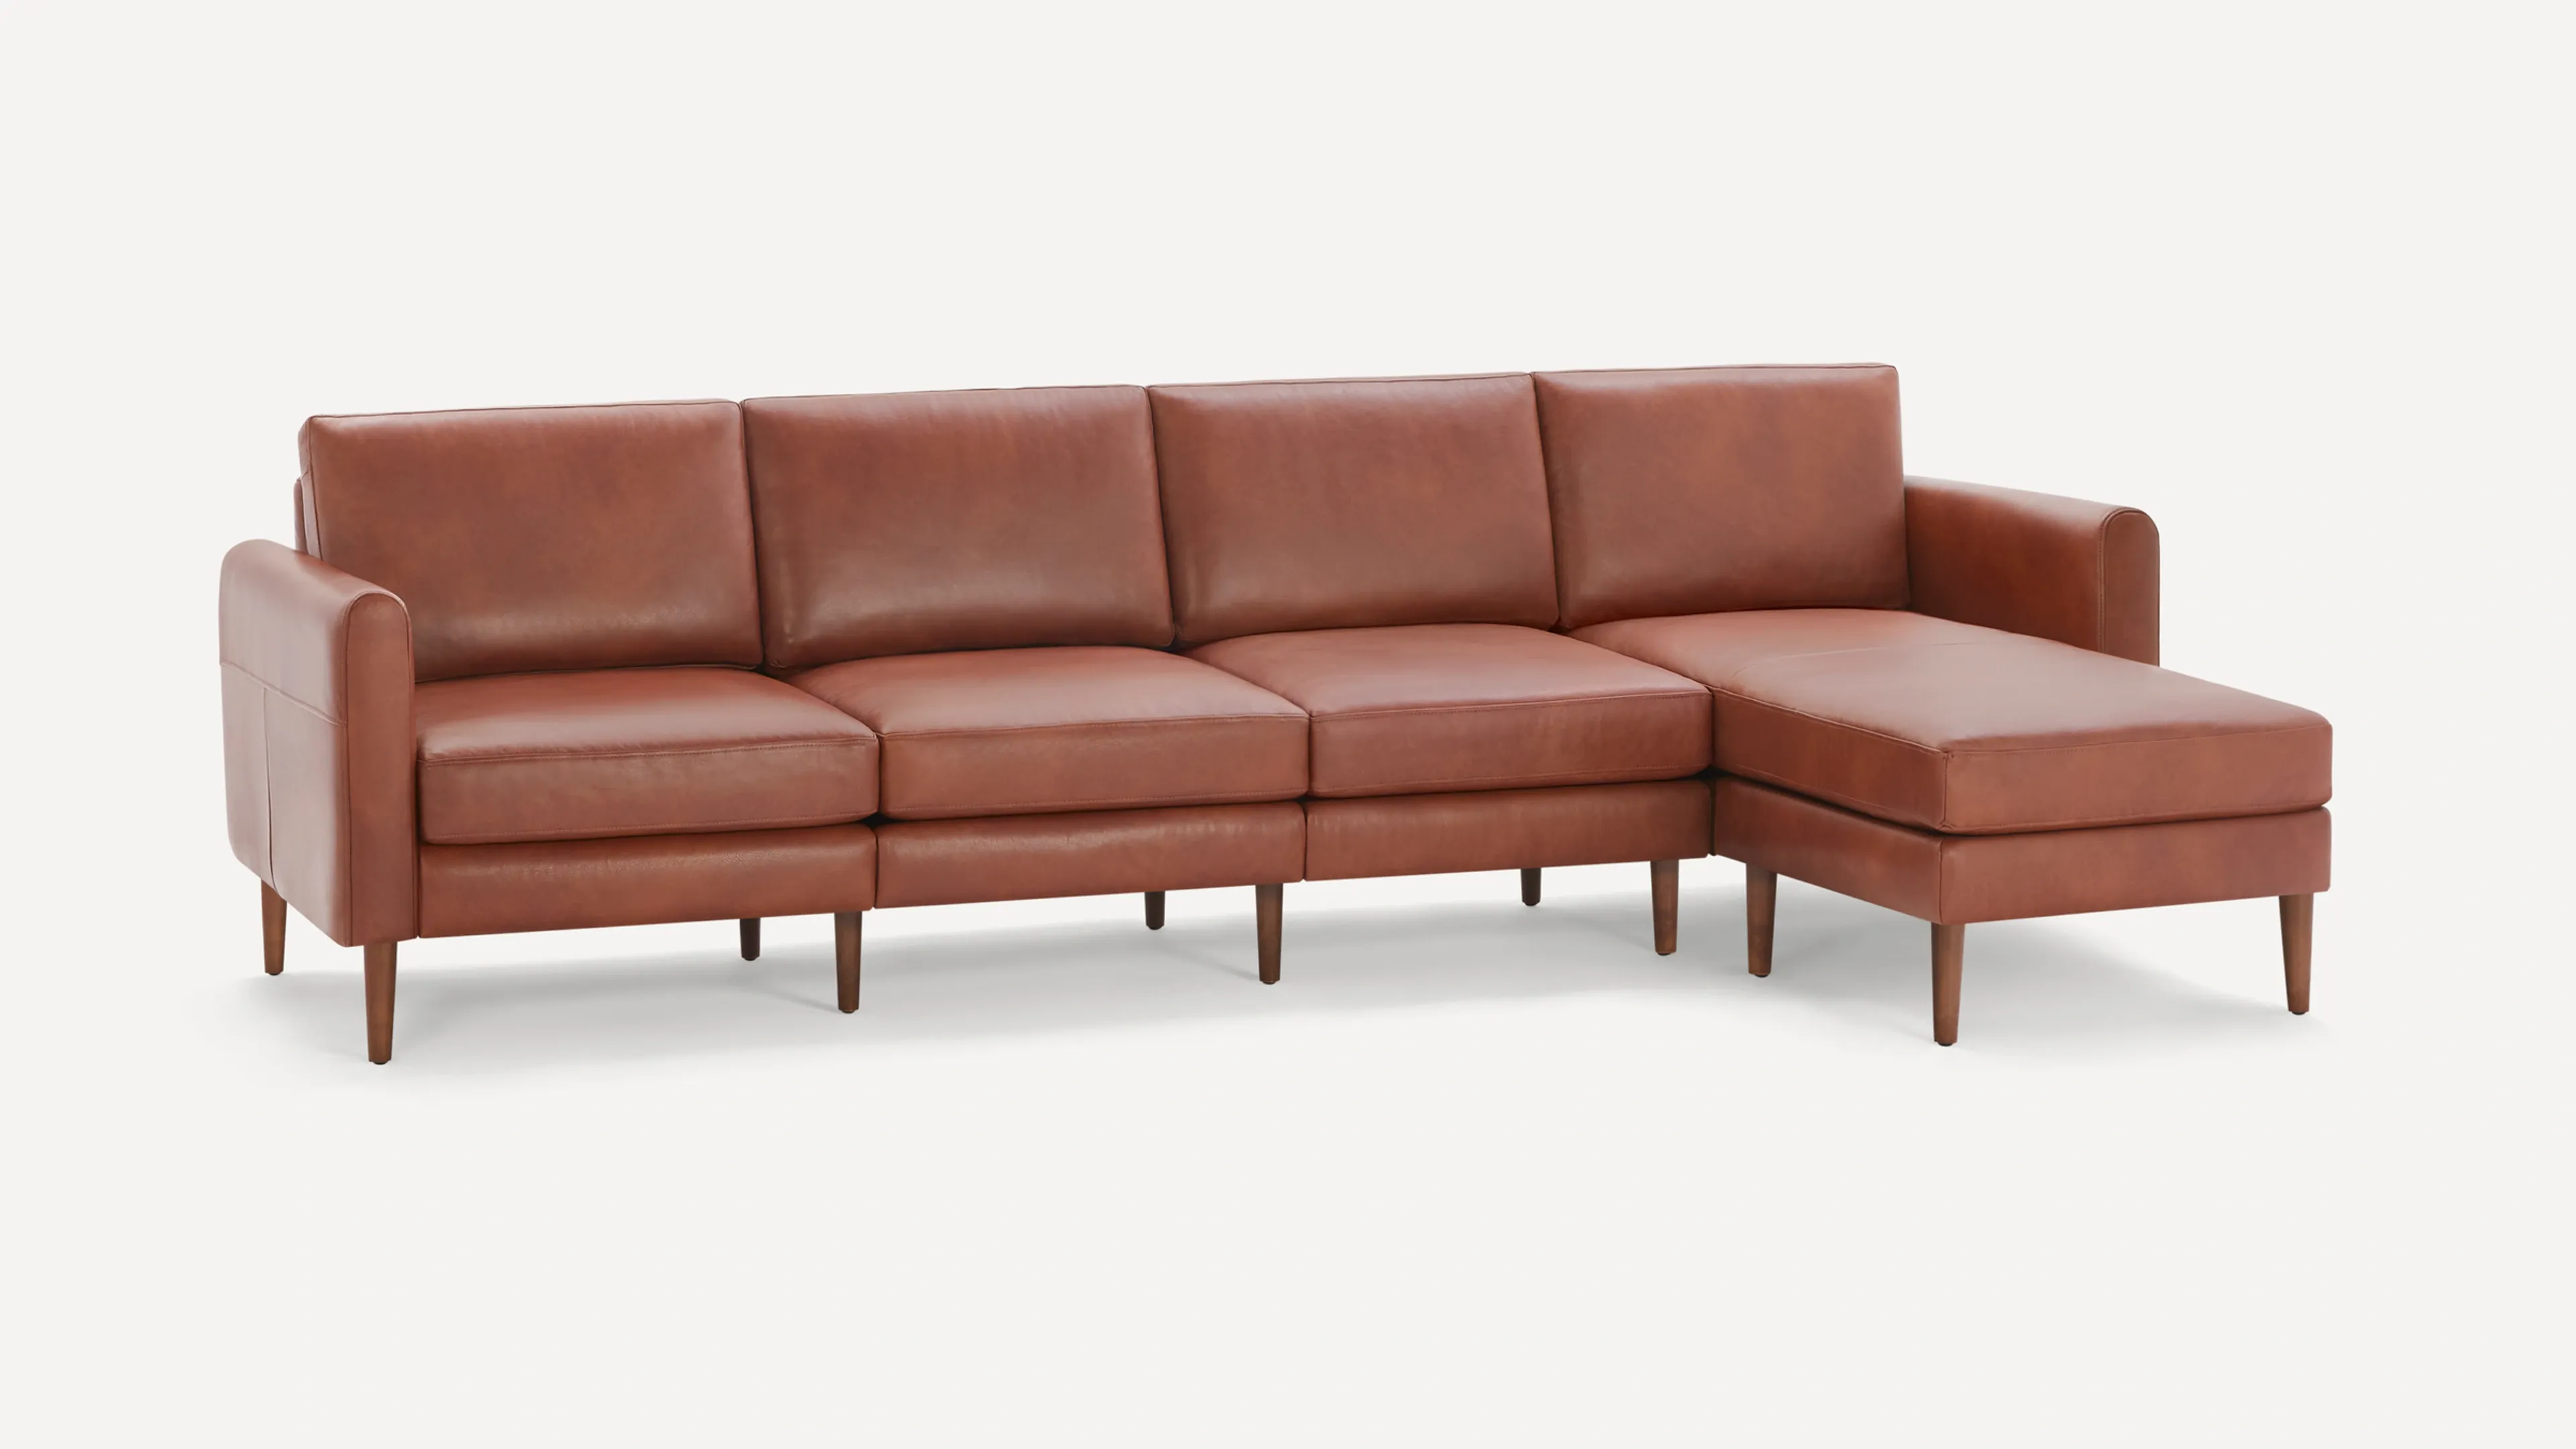 Original Chaise King Sofa in Chestnut Leather